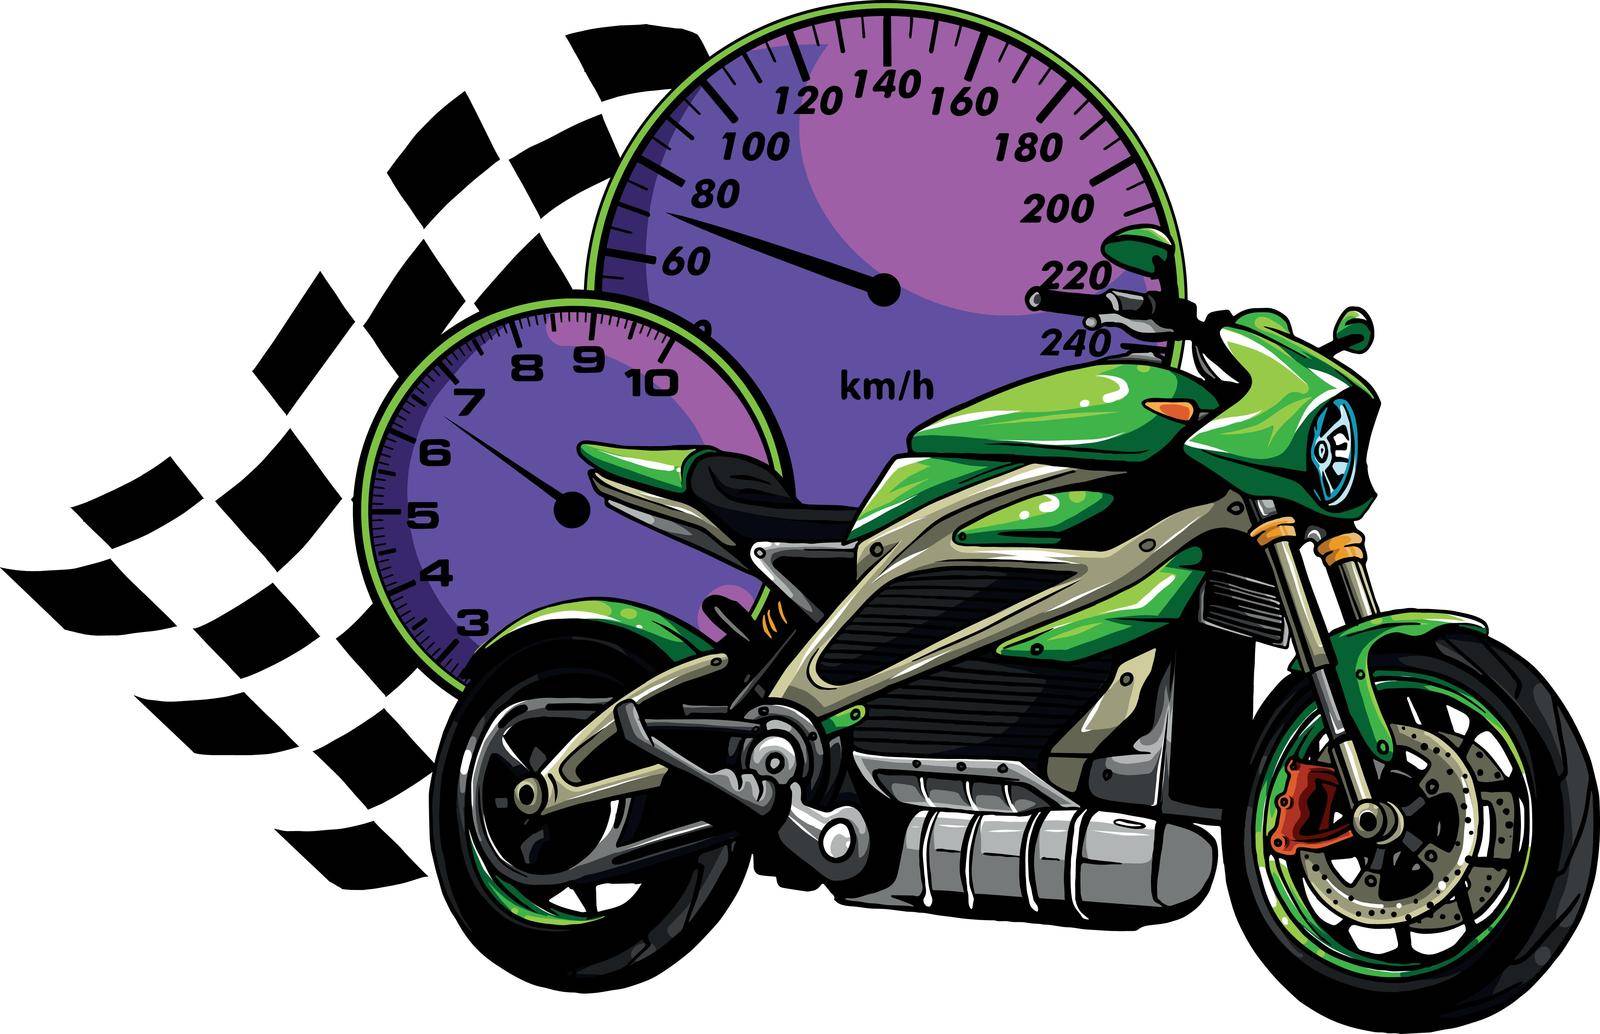 a Motorcycle racer sport vector illustration design by dean